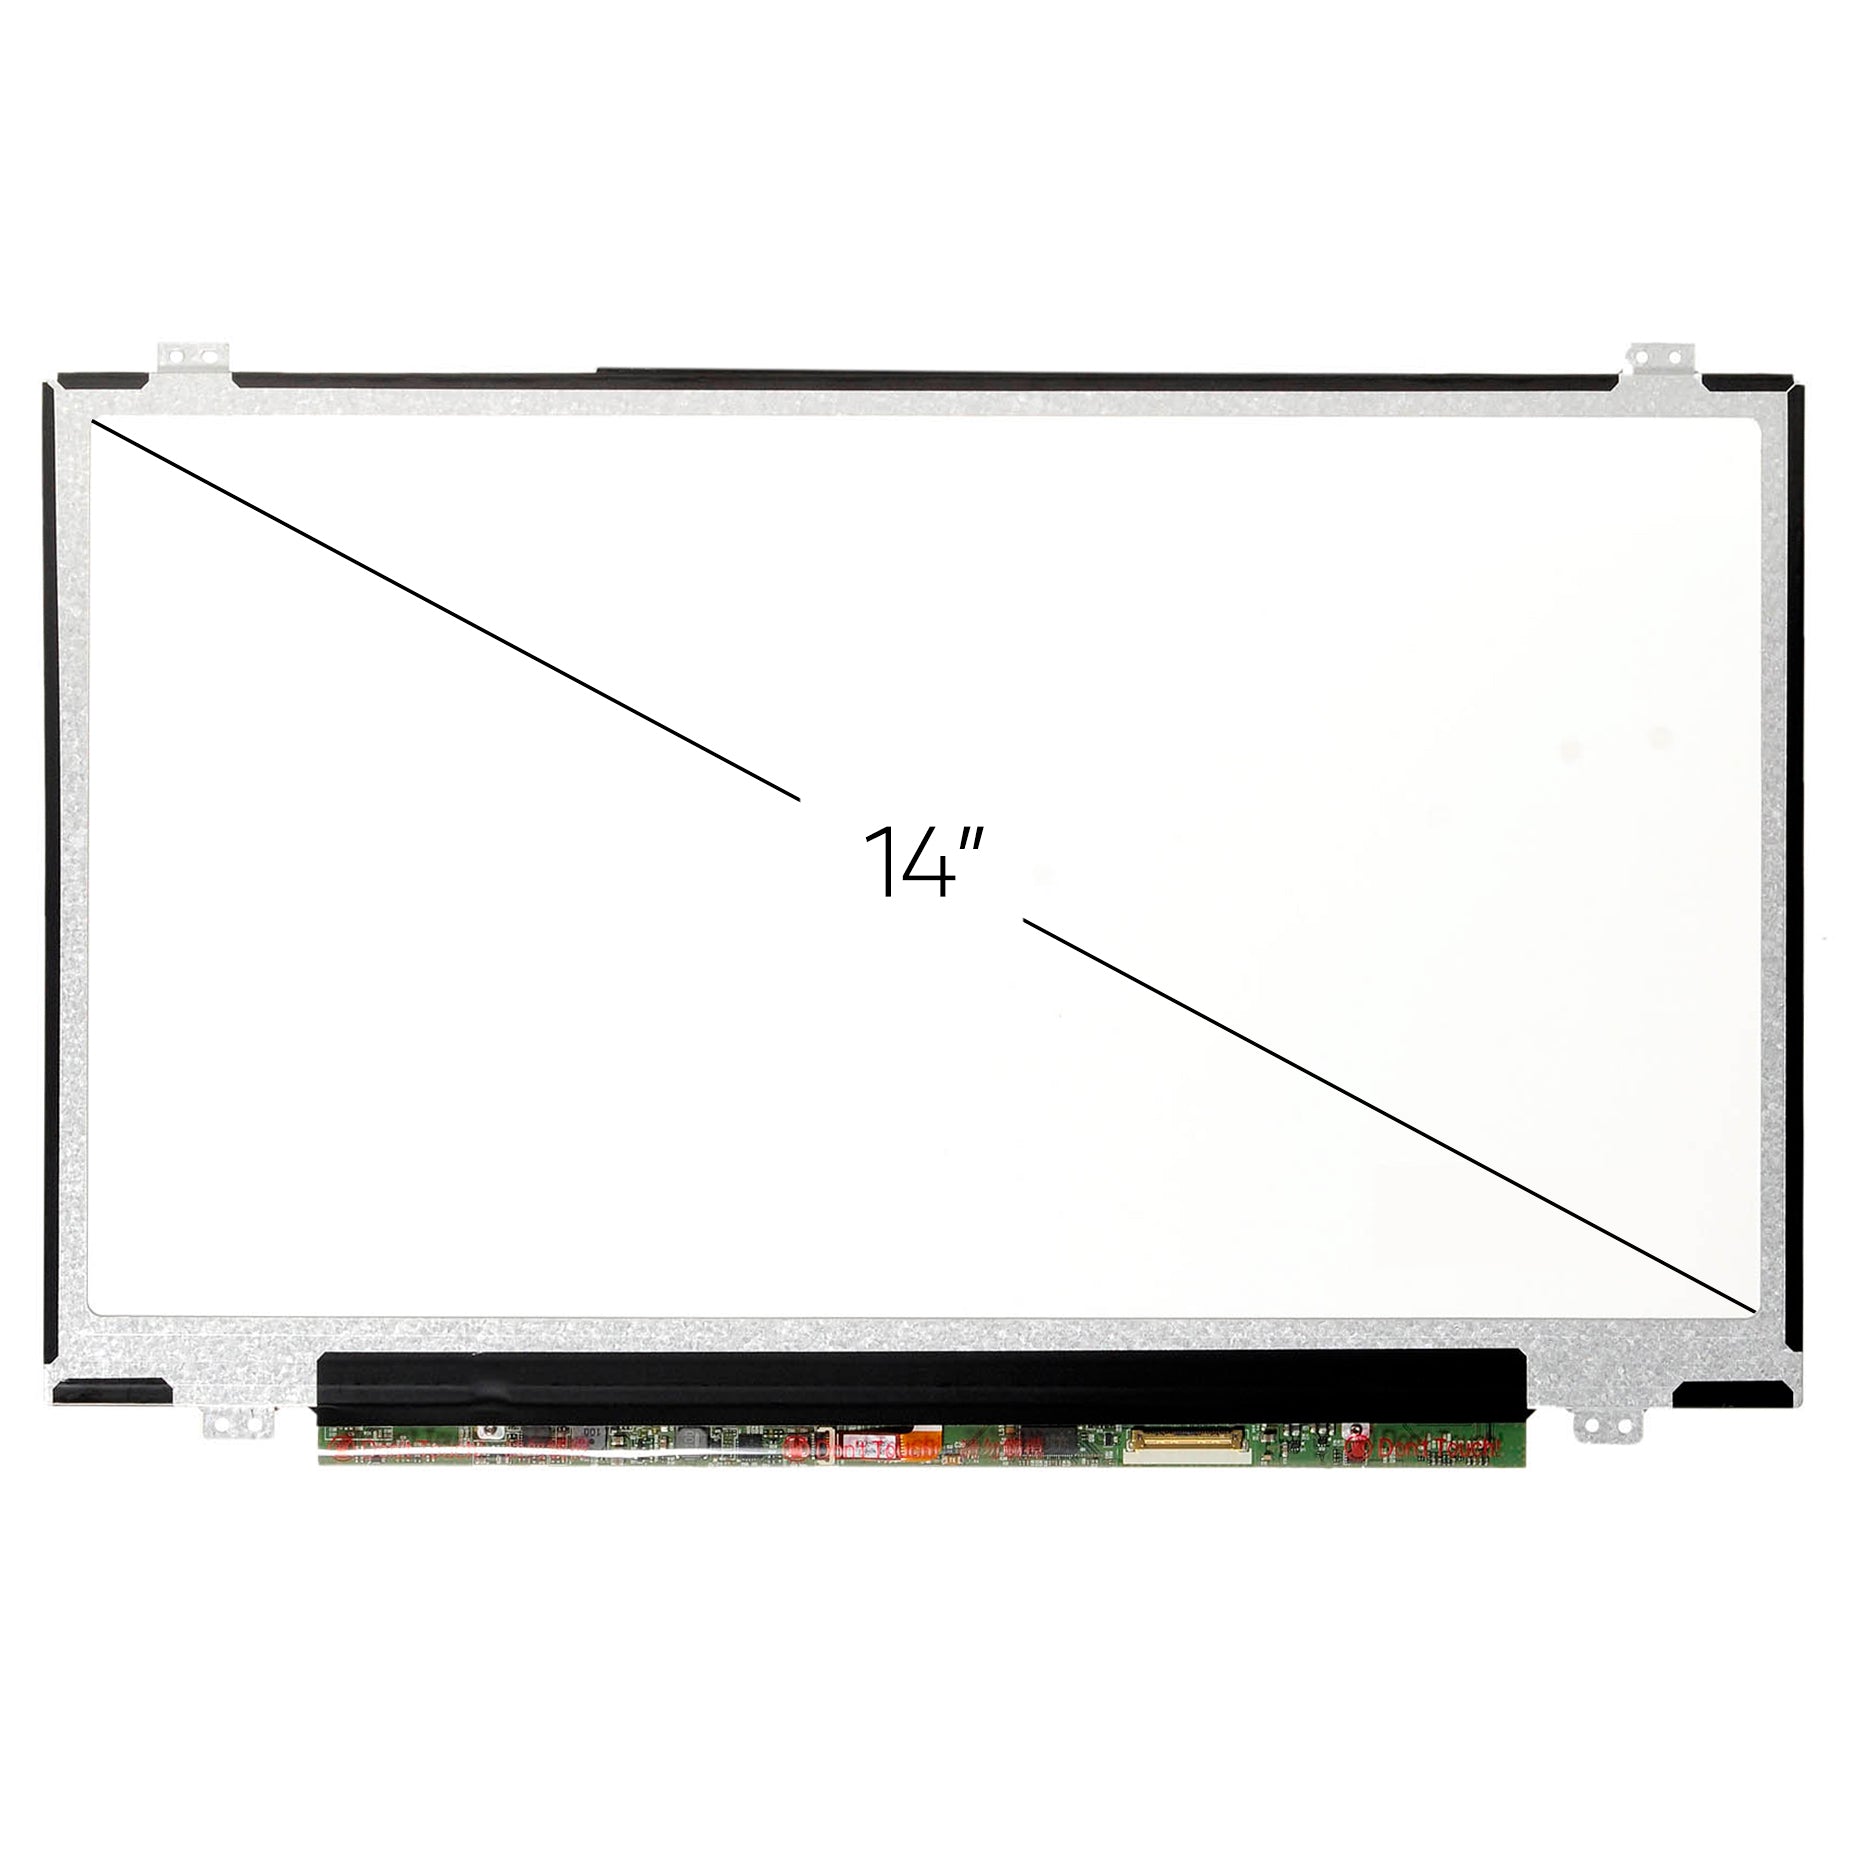 Screen Replacement for LP140WF6(SP)(B3) FHD 1920x1080 IPS Matte LCD LED Display